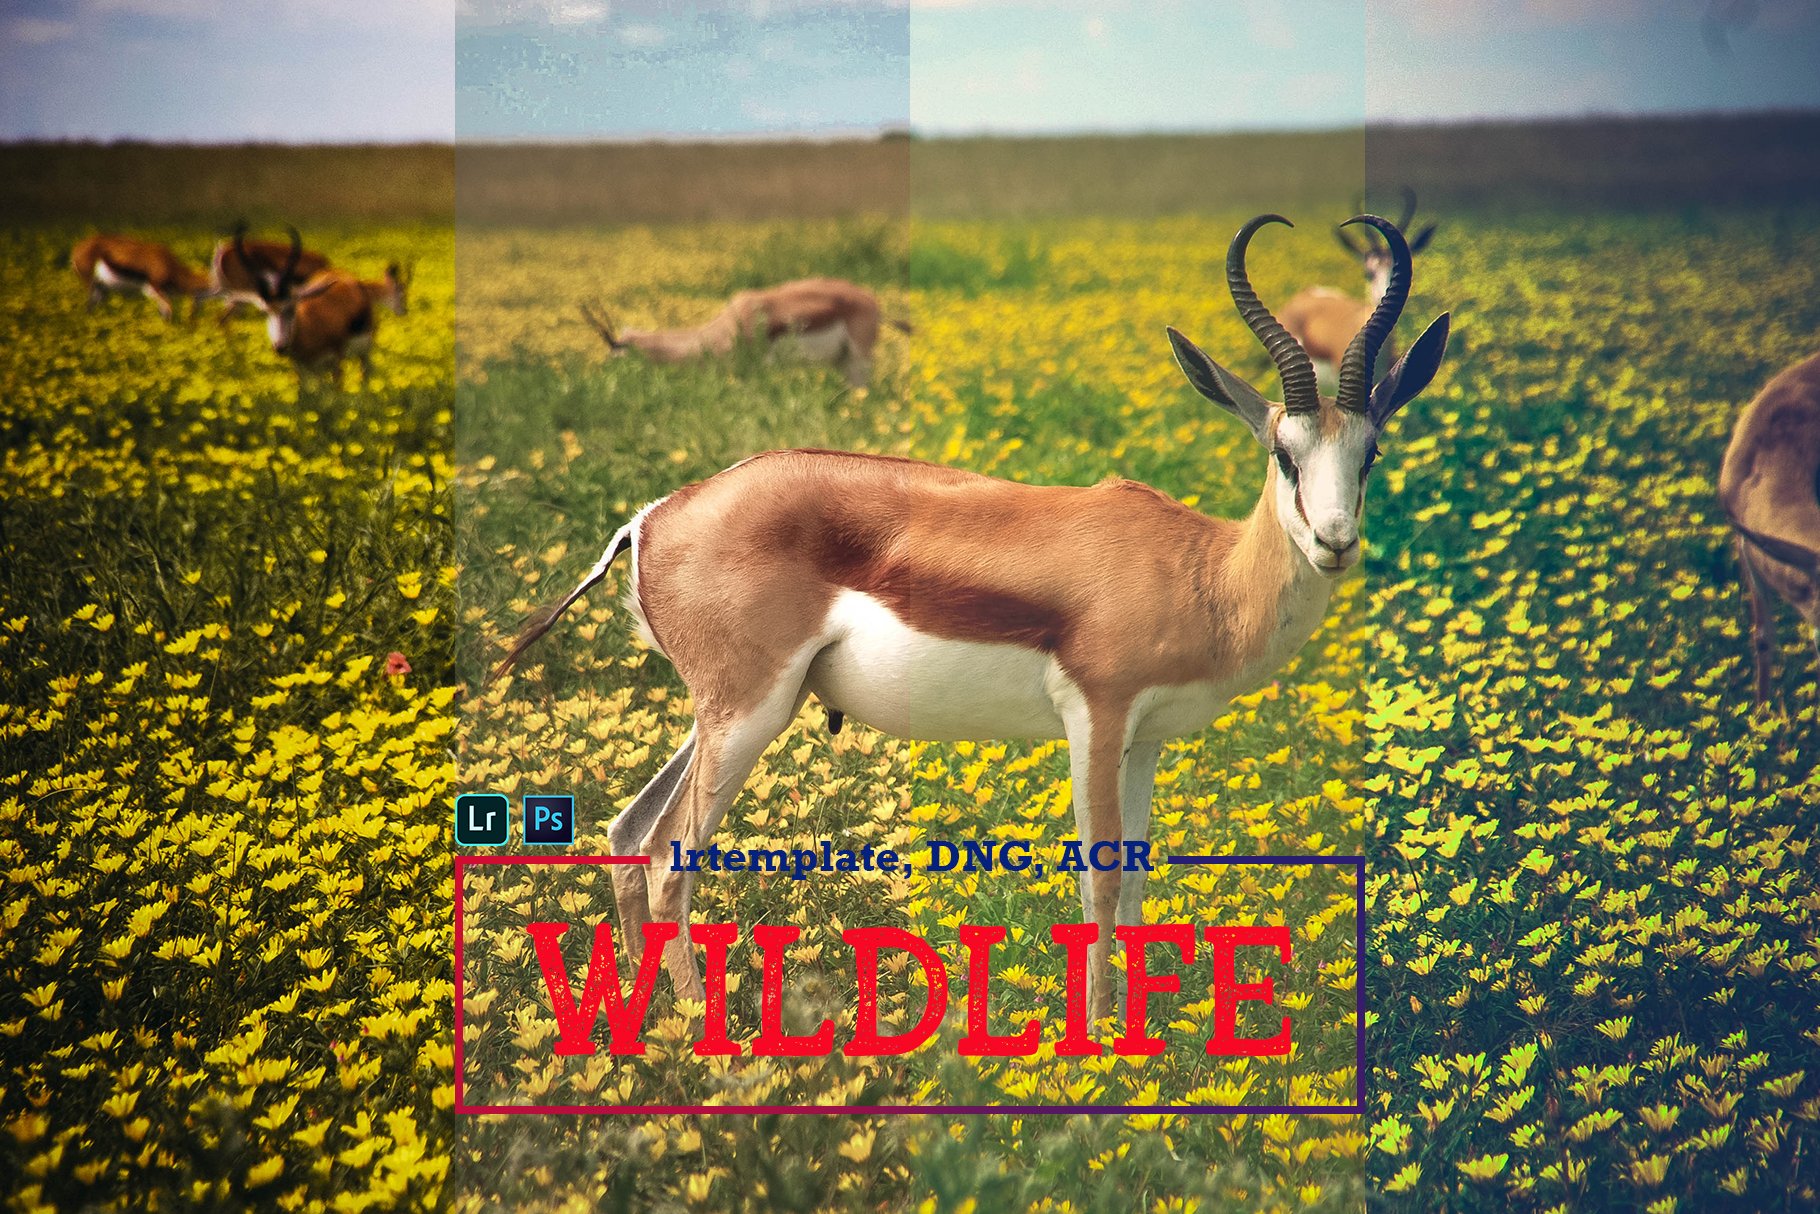 Wildlife Mobile LR and ACR Presetscover image.